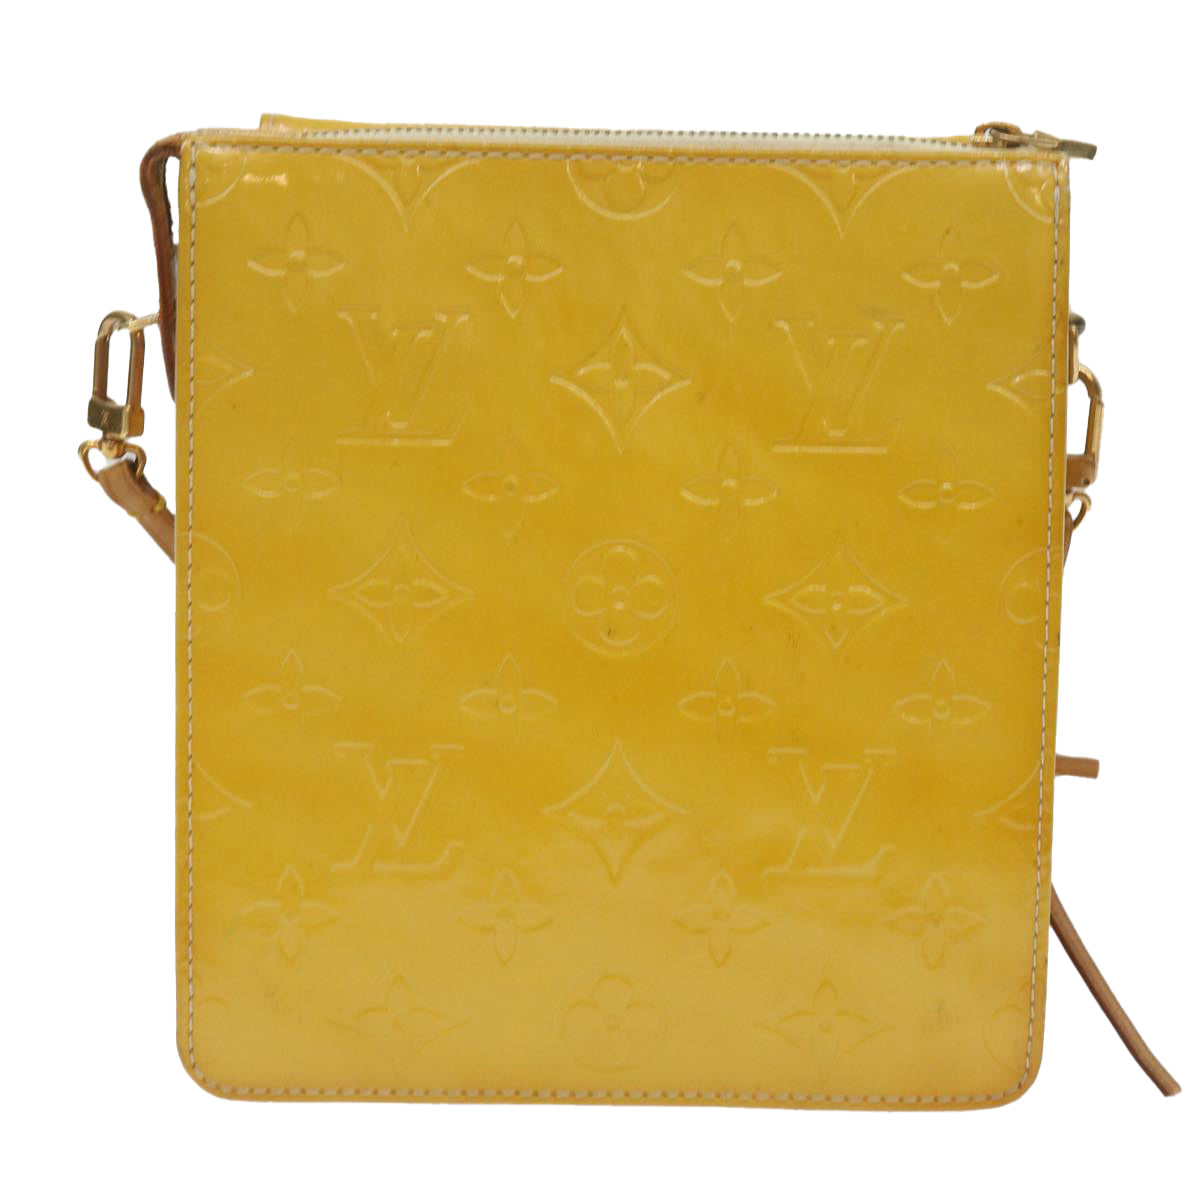 LOUIS VUITTON Monogram Vernis Motto Pouch Lime Yellow M91059 LV Auth bs12692